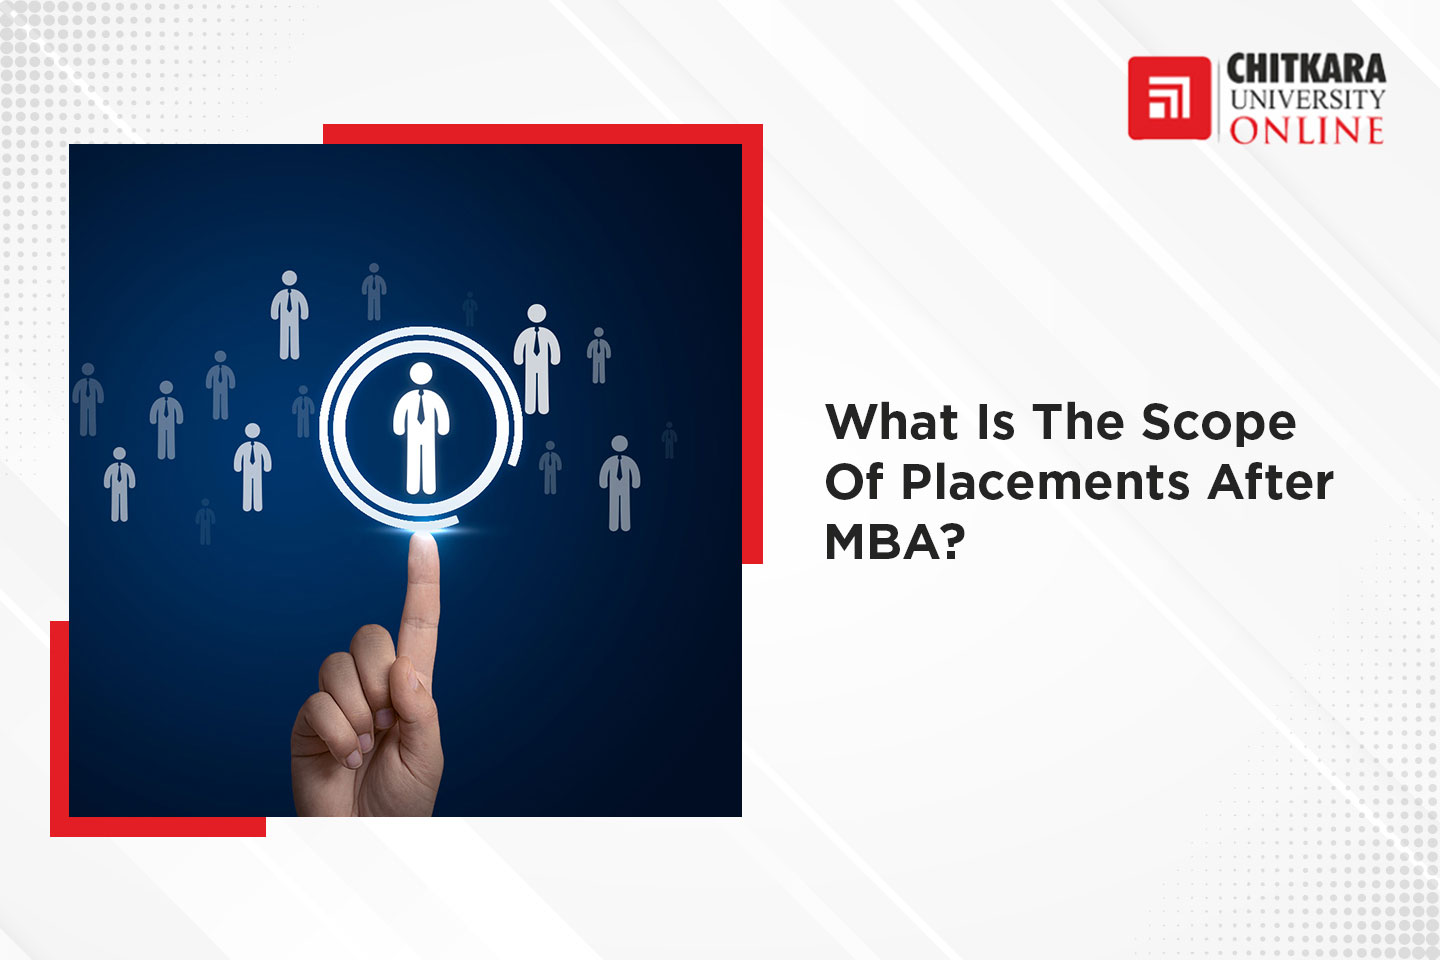 What is the Placement Scope After MBA | ChitkaraU Online